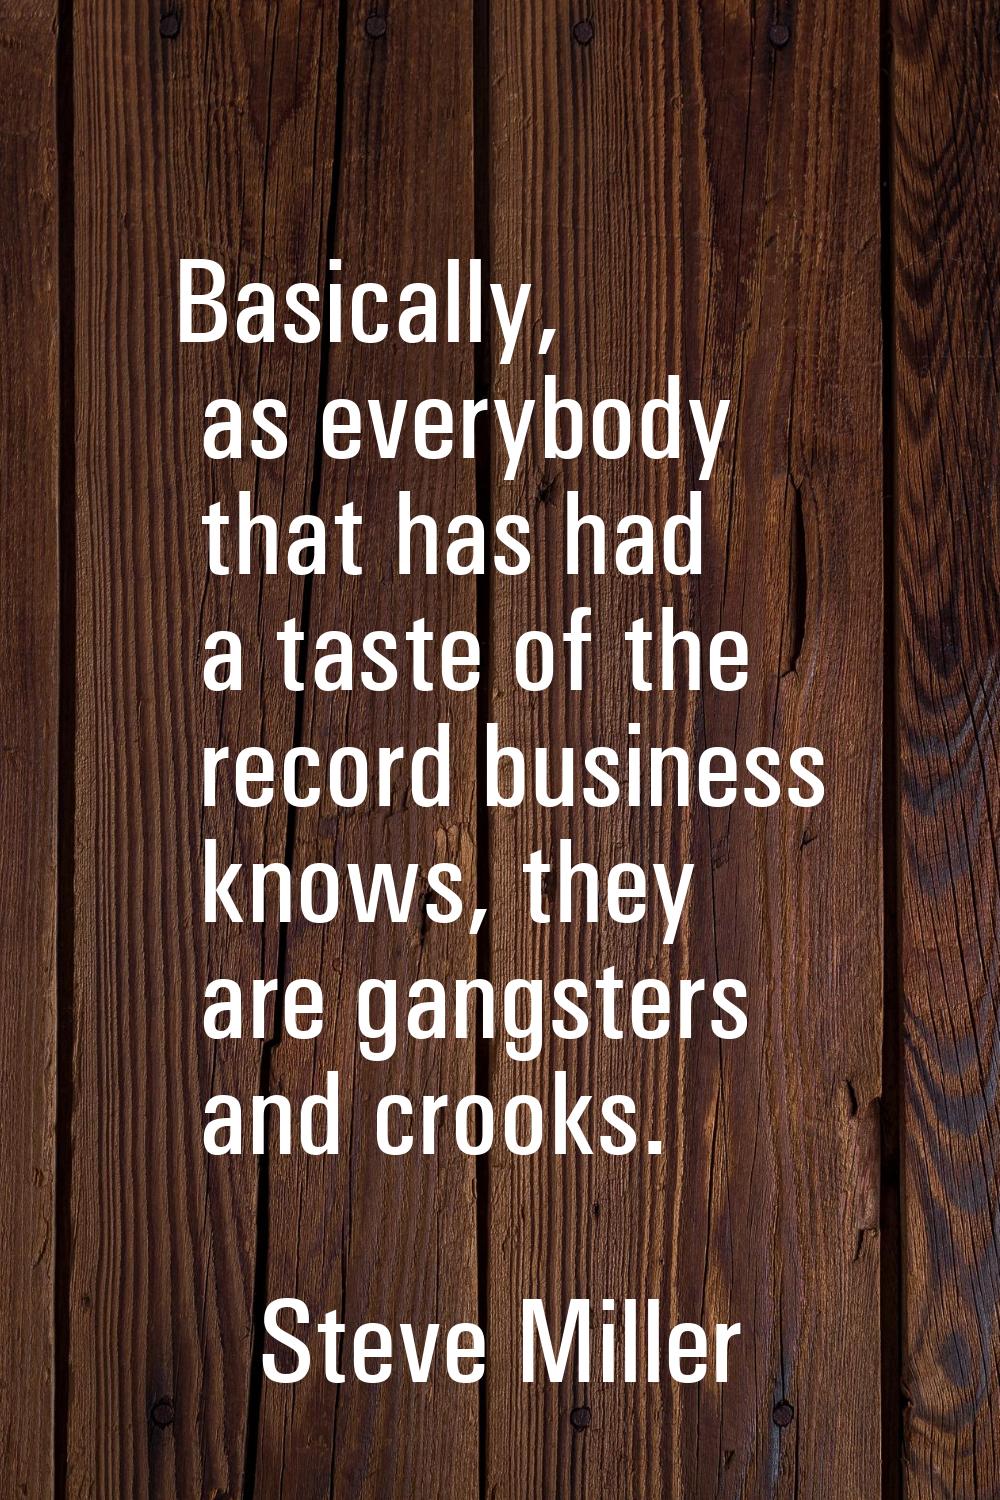 Basically, as everybody that has had a taste of the record business knows, they are gangsters and c